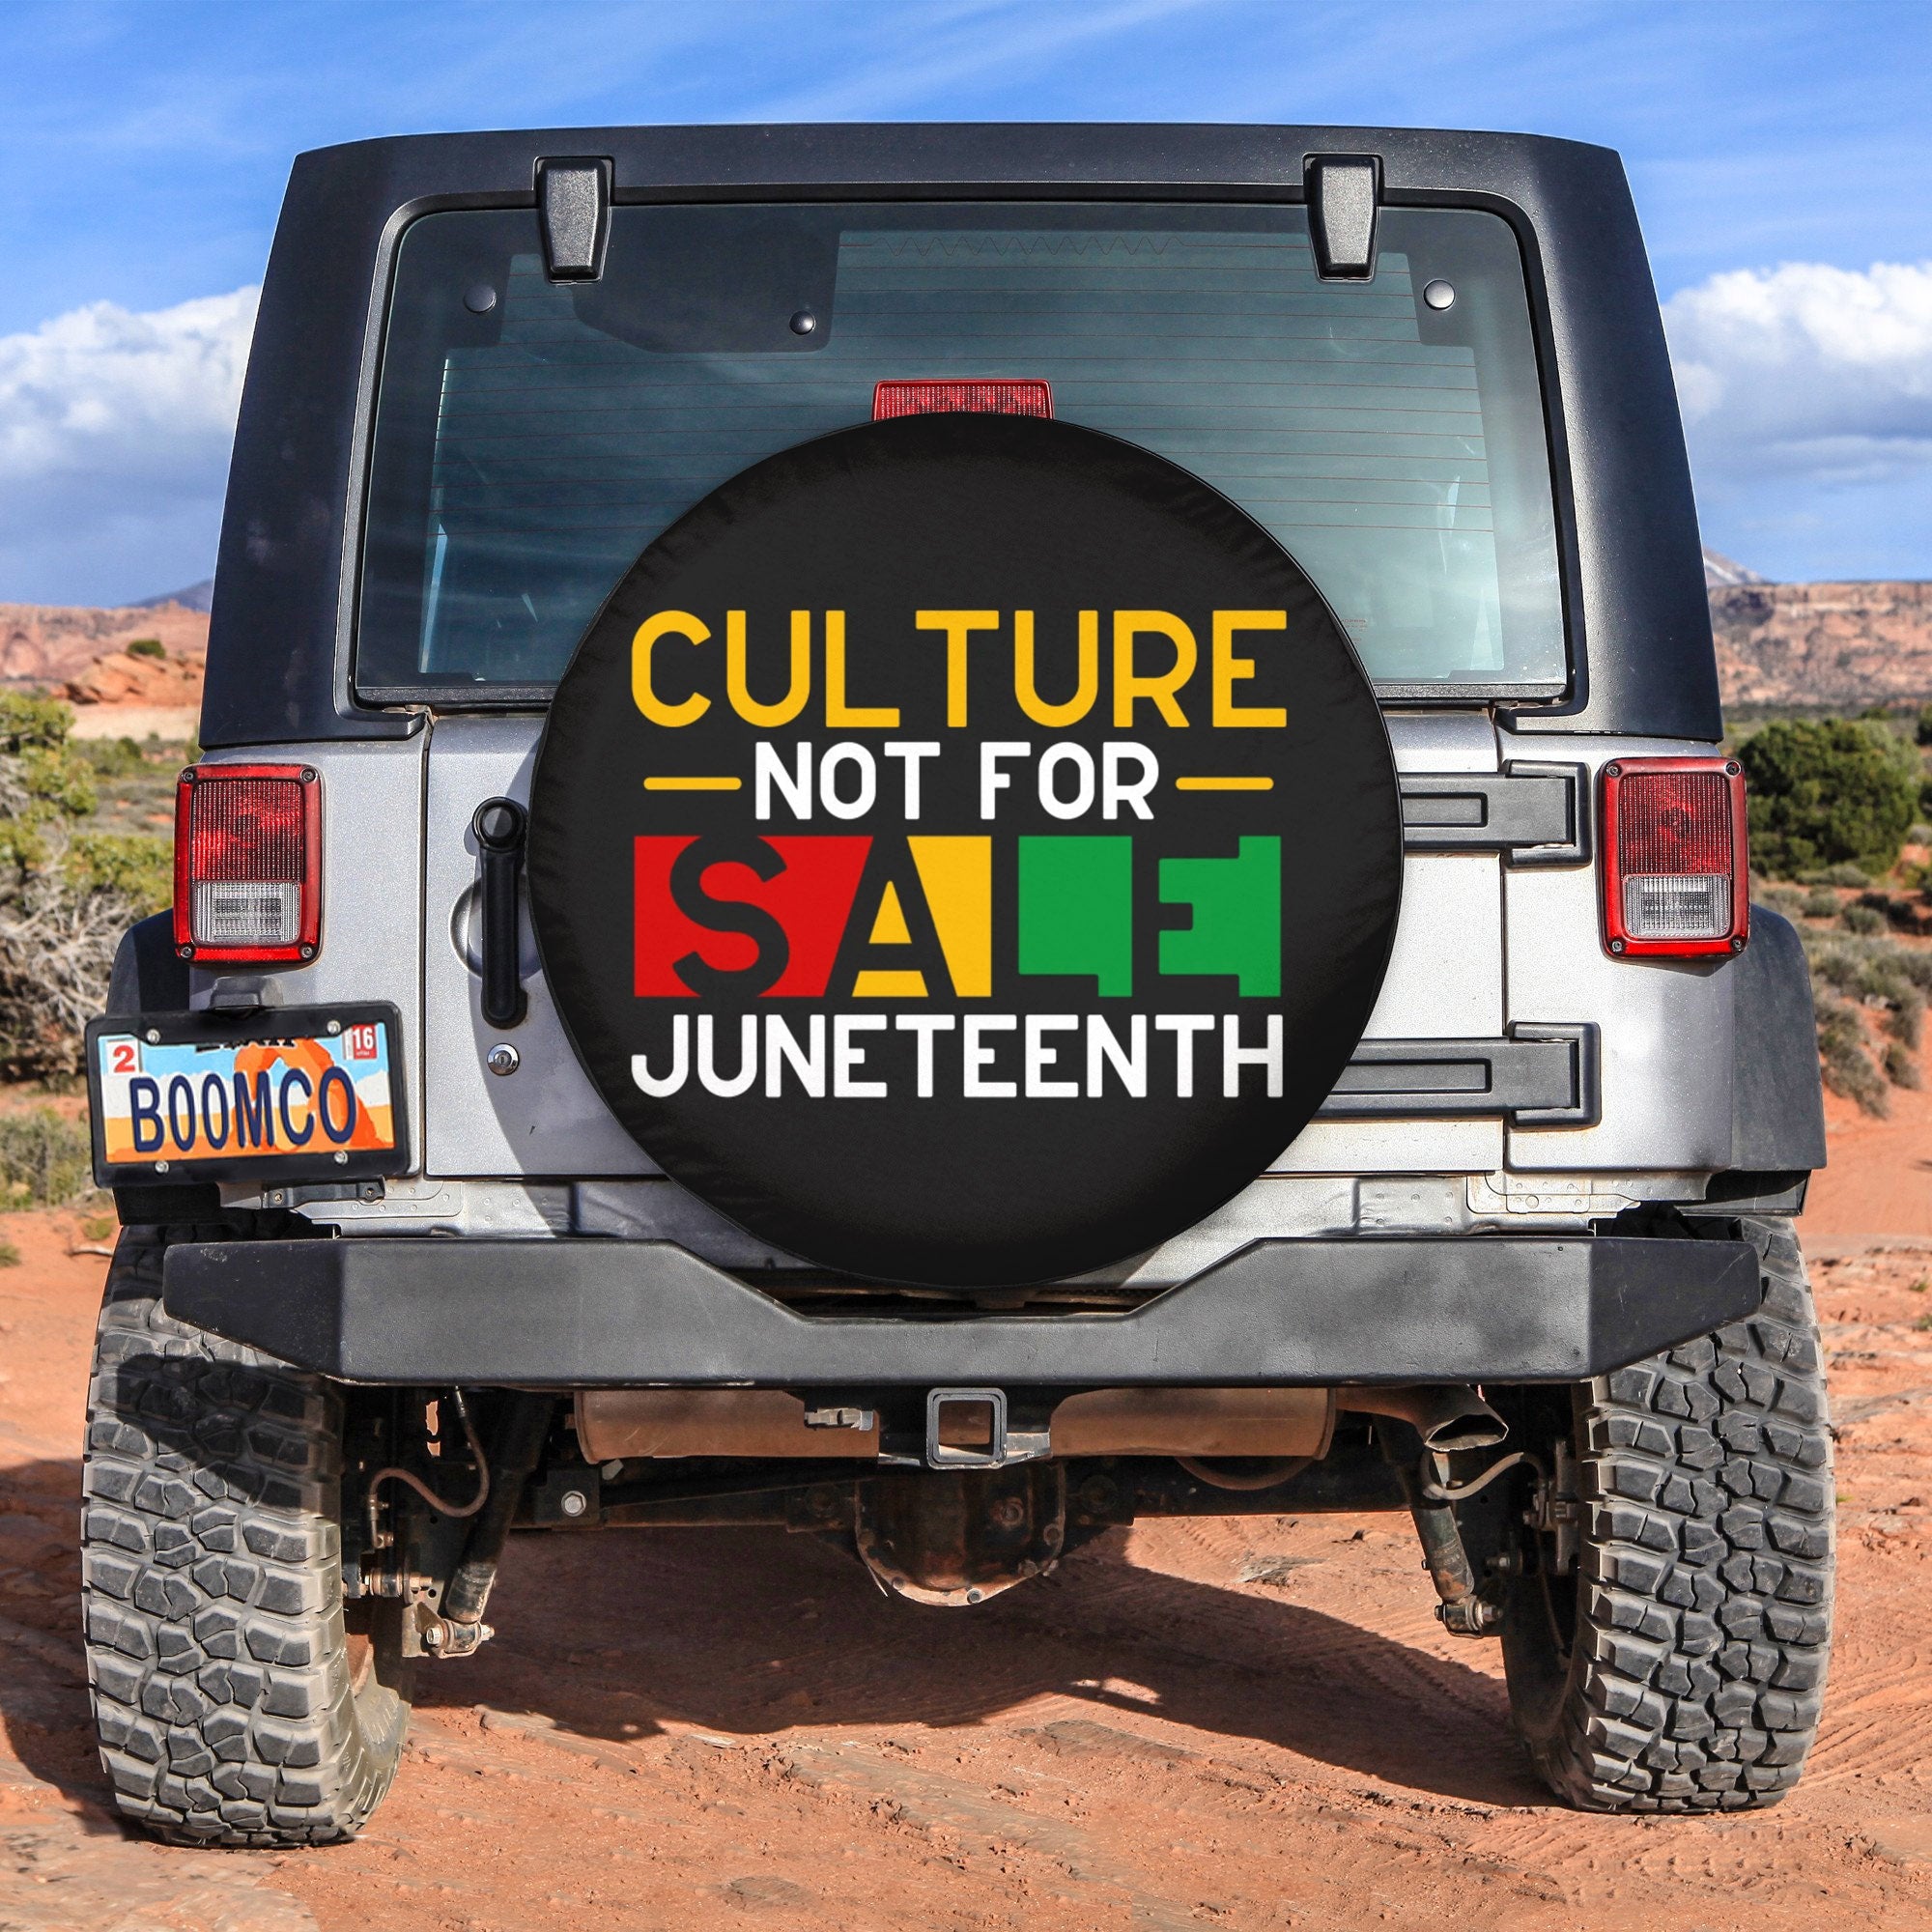 African Tire Covers - Juneteenth Spare Tire Cover Culture Not For Sale Juneteenth NO.204 LT8